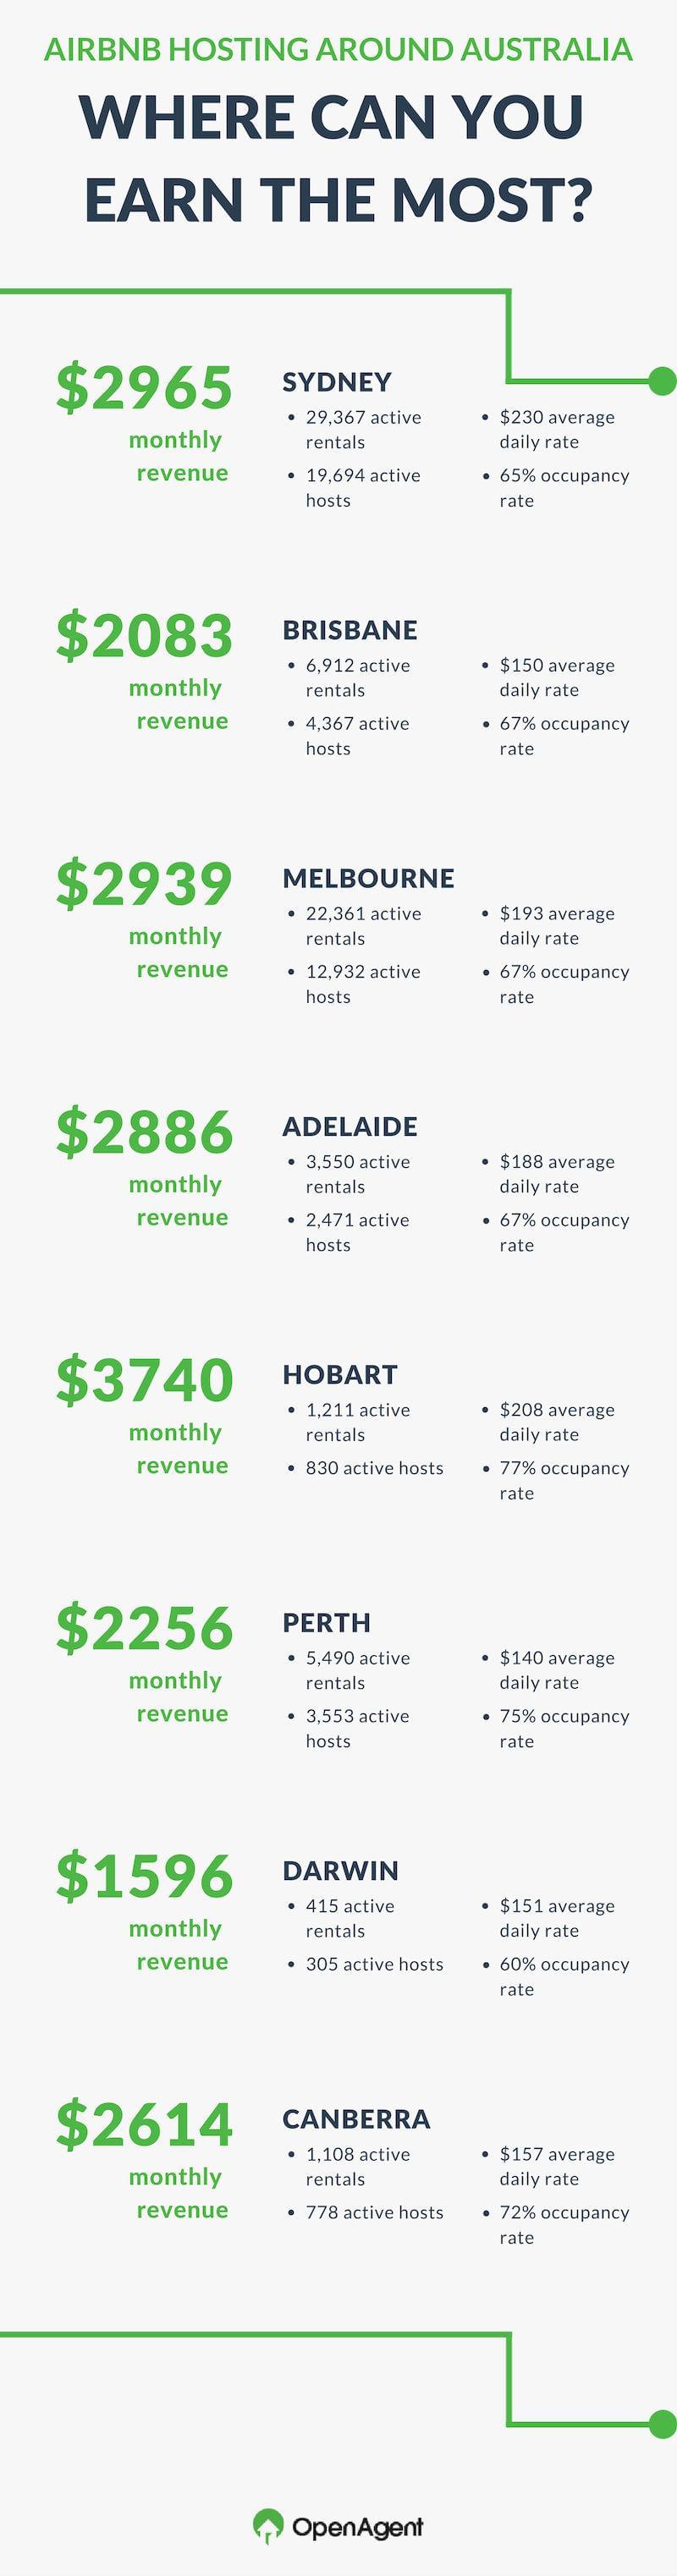 where can you earn the most from airbnb?